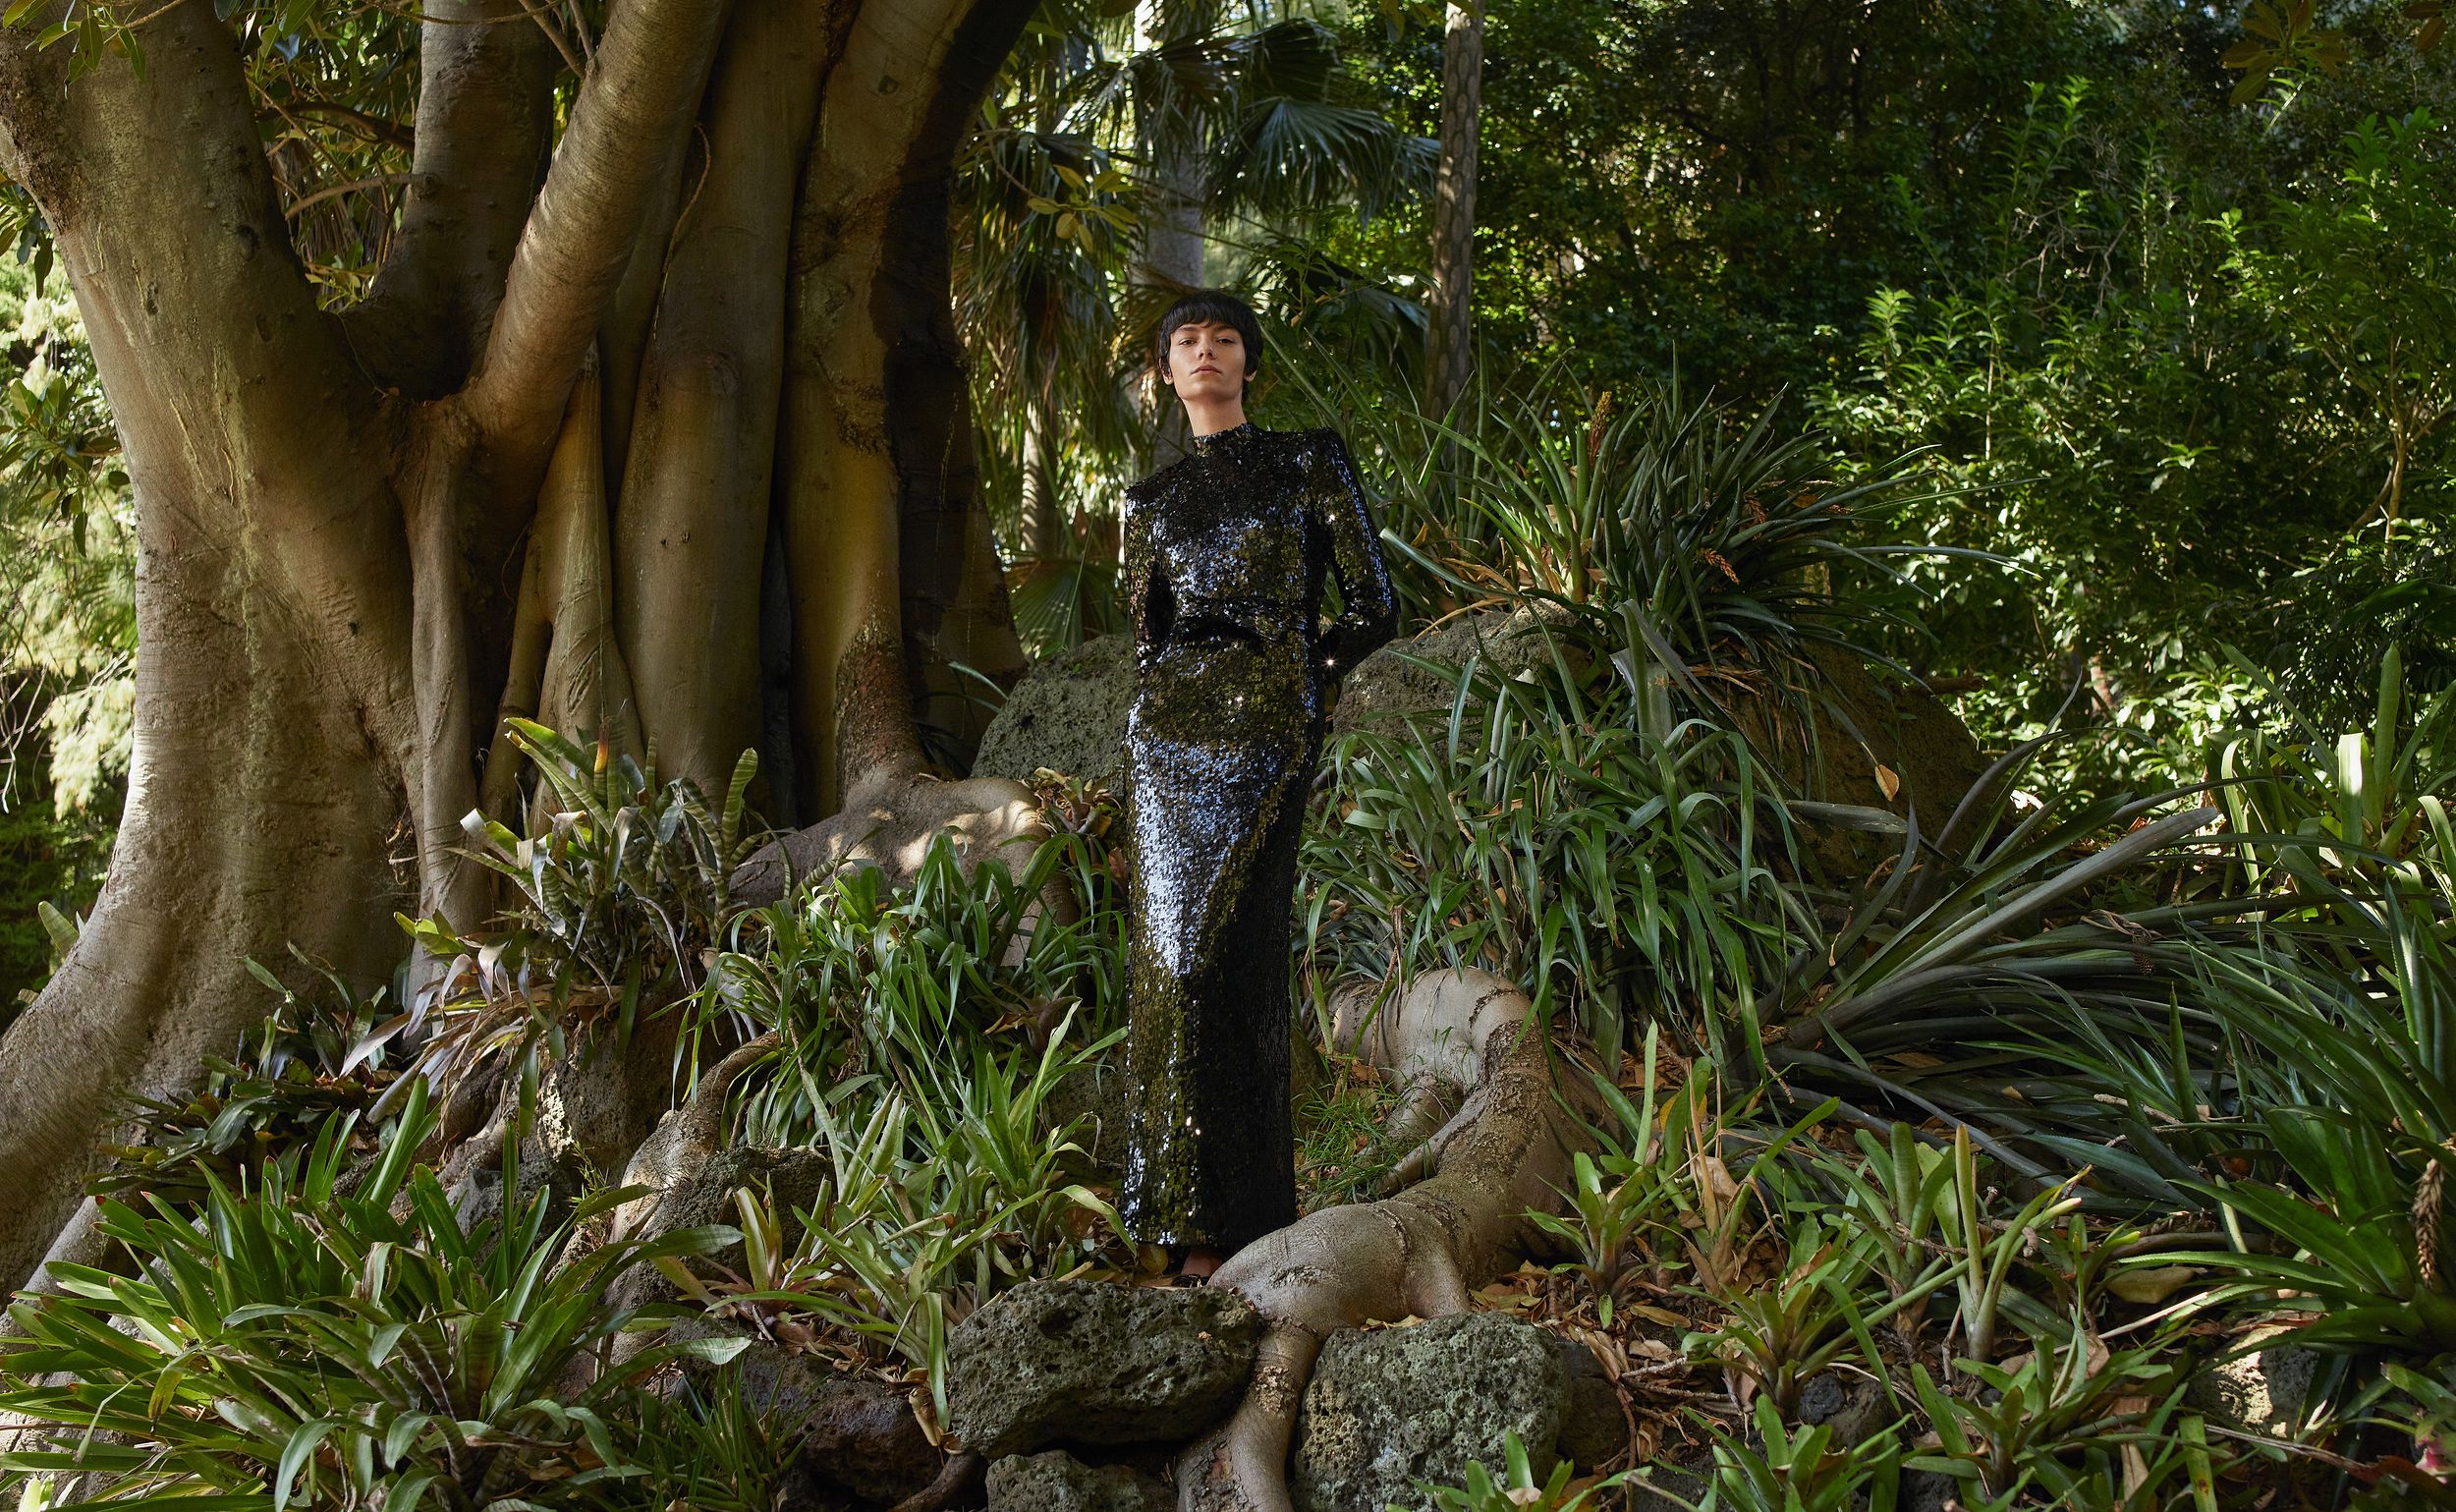 Model standing amongst dense greenery in front of a fig tree wearing a black sequined gown